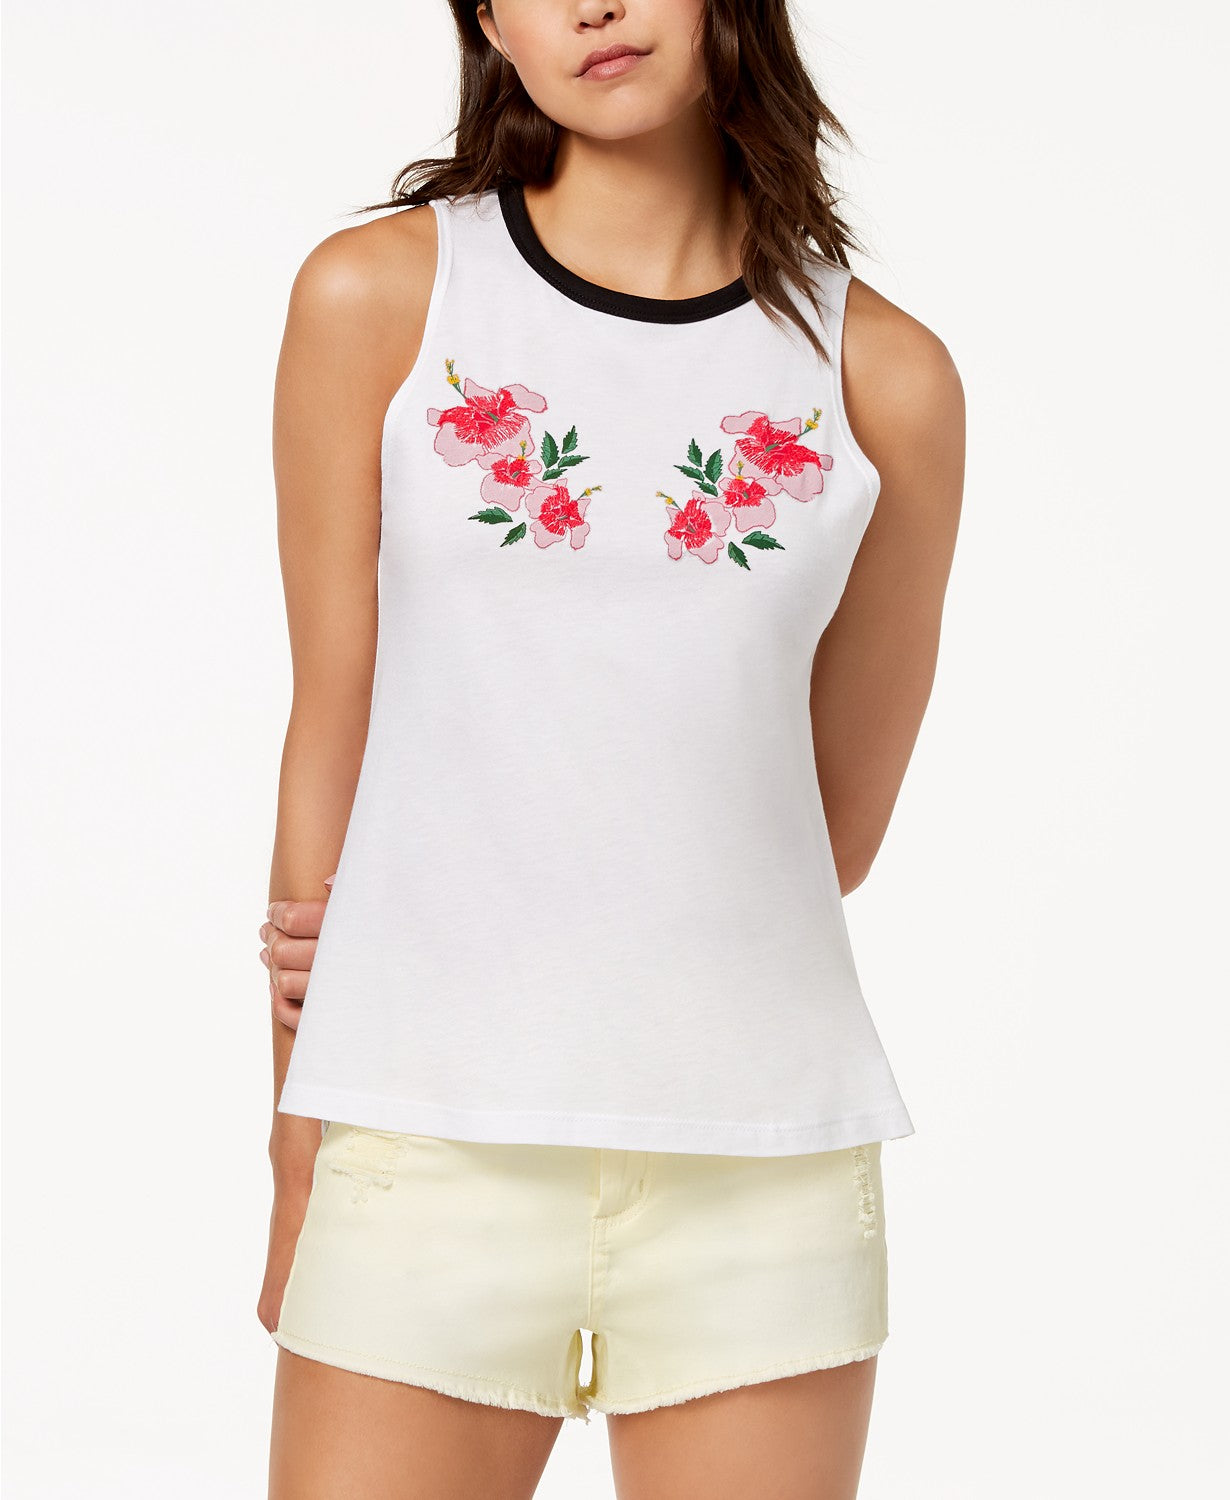 Carbon Copy Floral-Embroidered Tank Top White XL